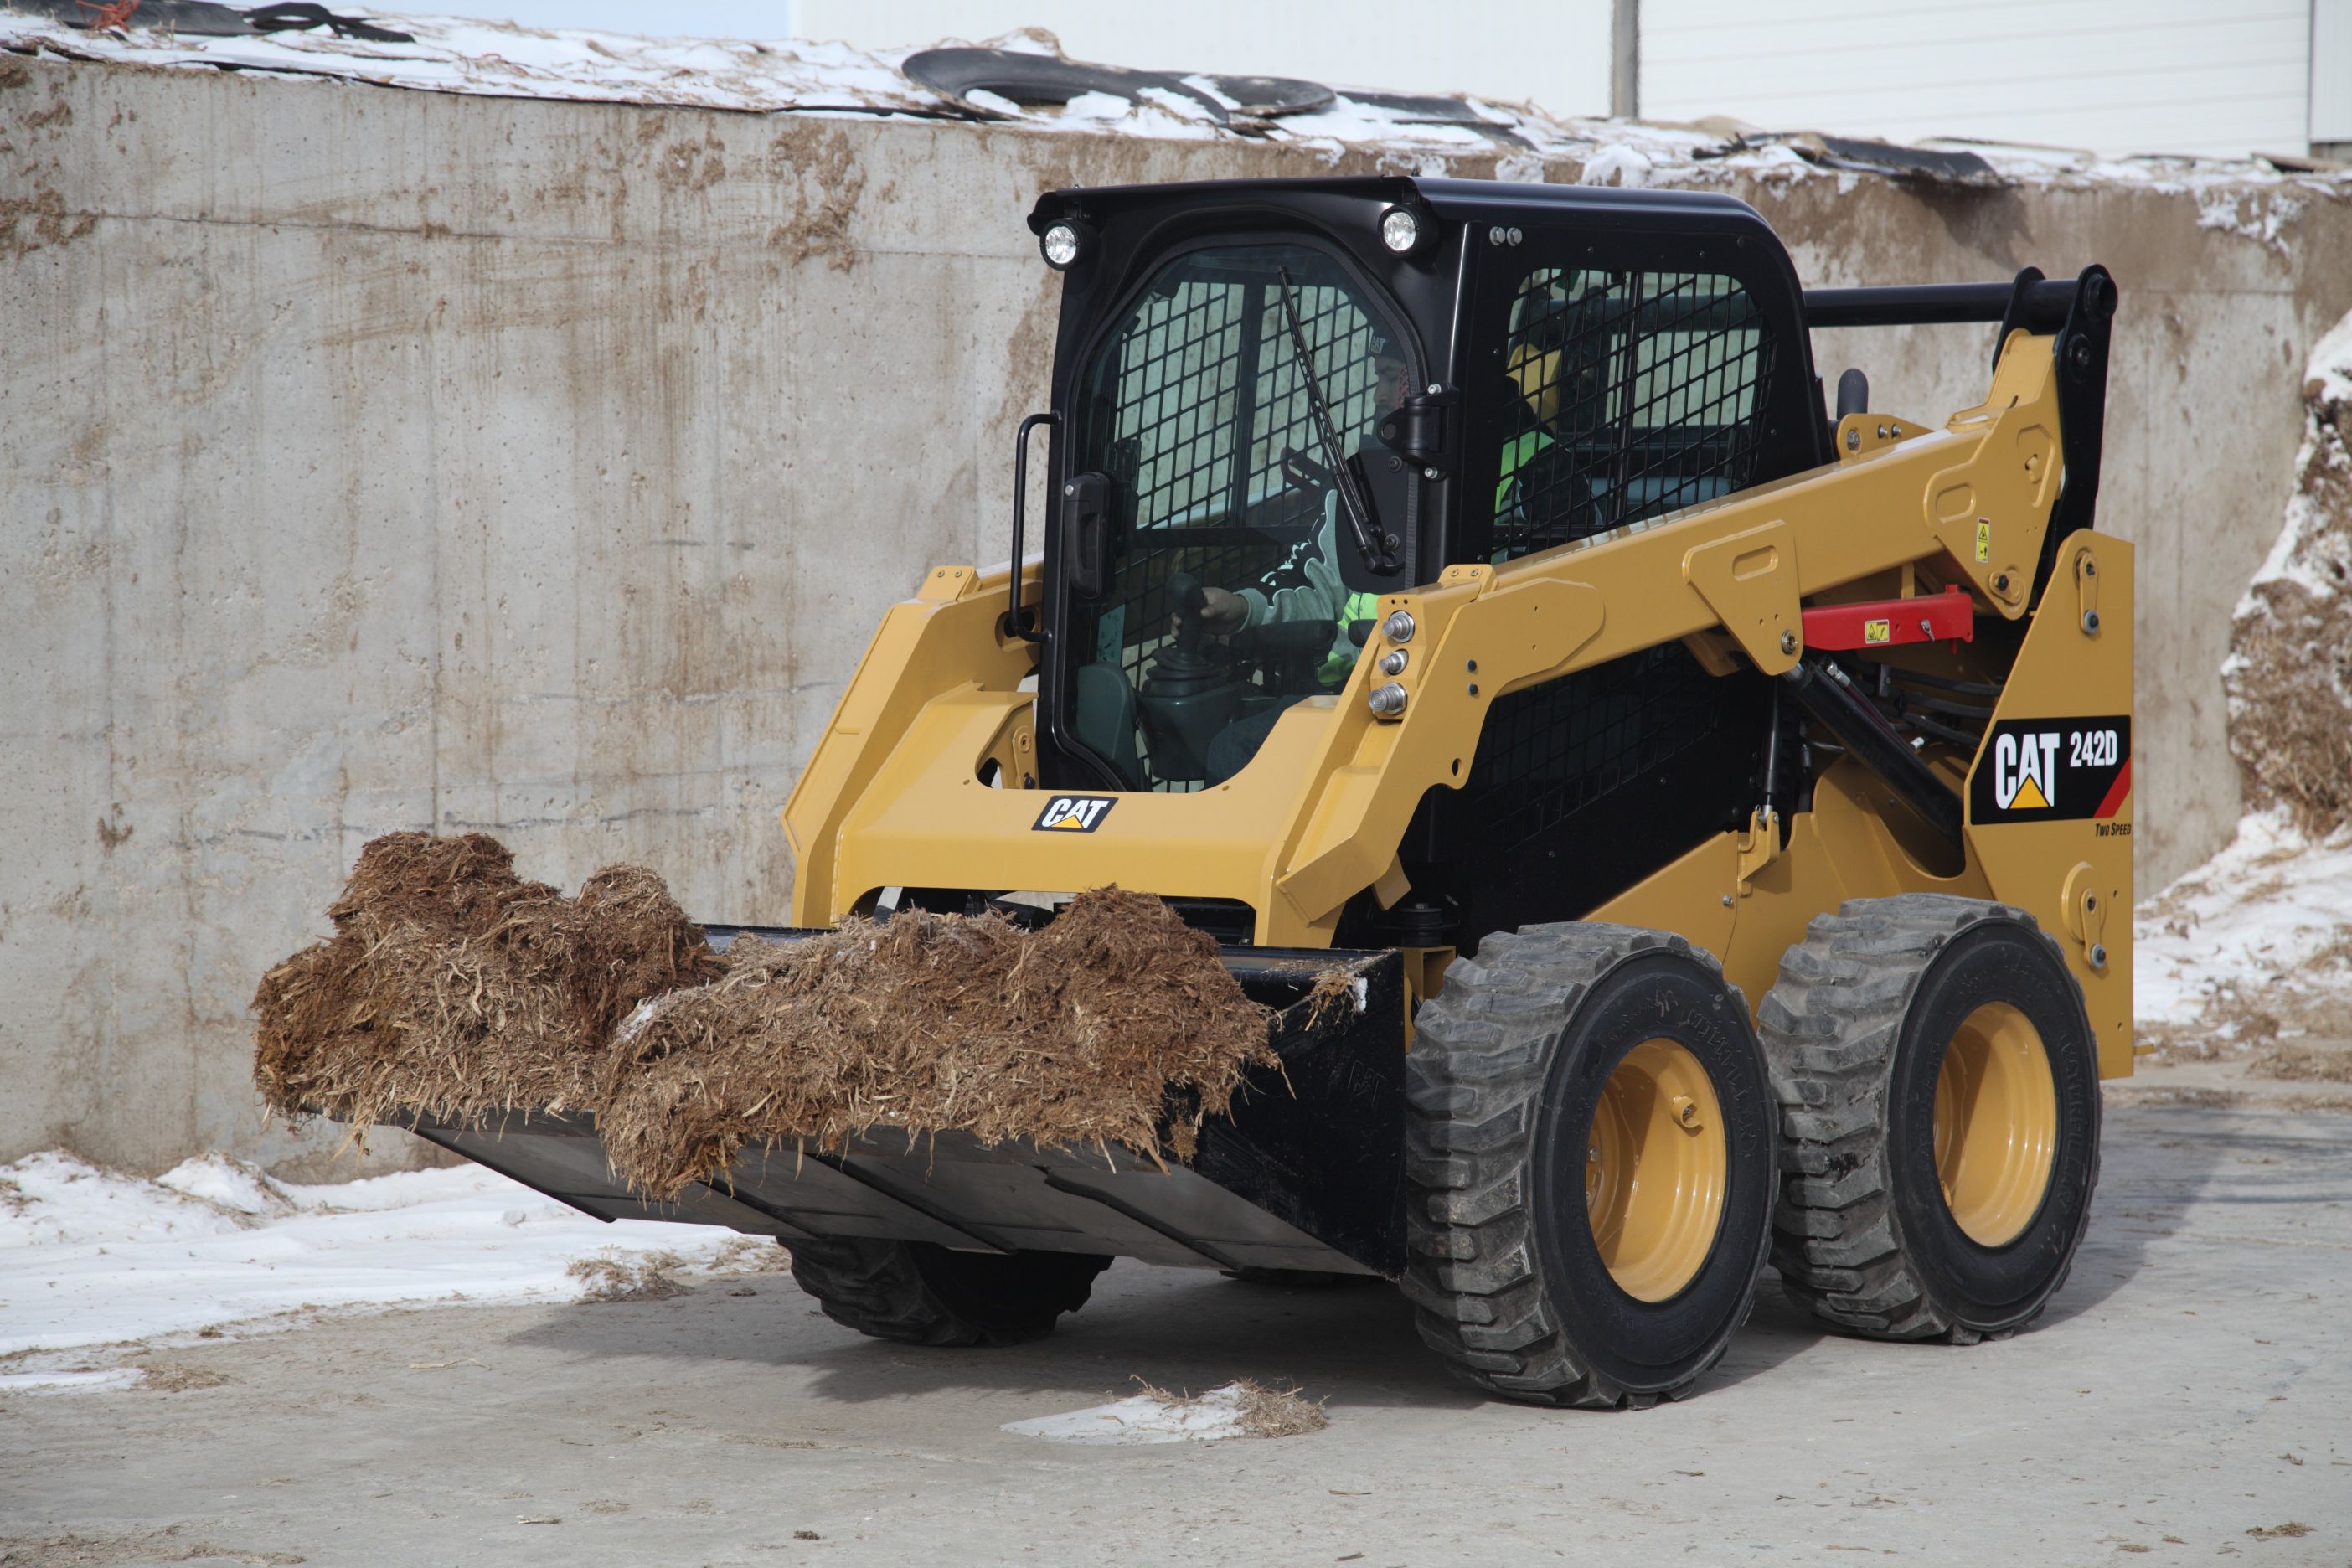 Learn More About Buying a Used Skid Steer Loader